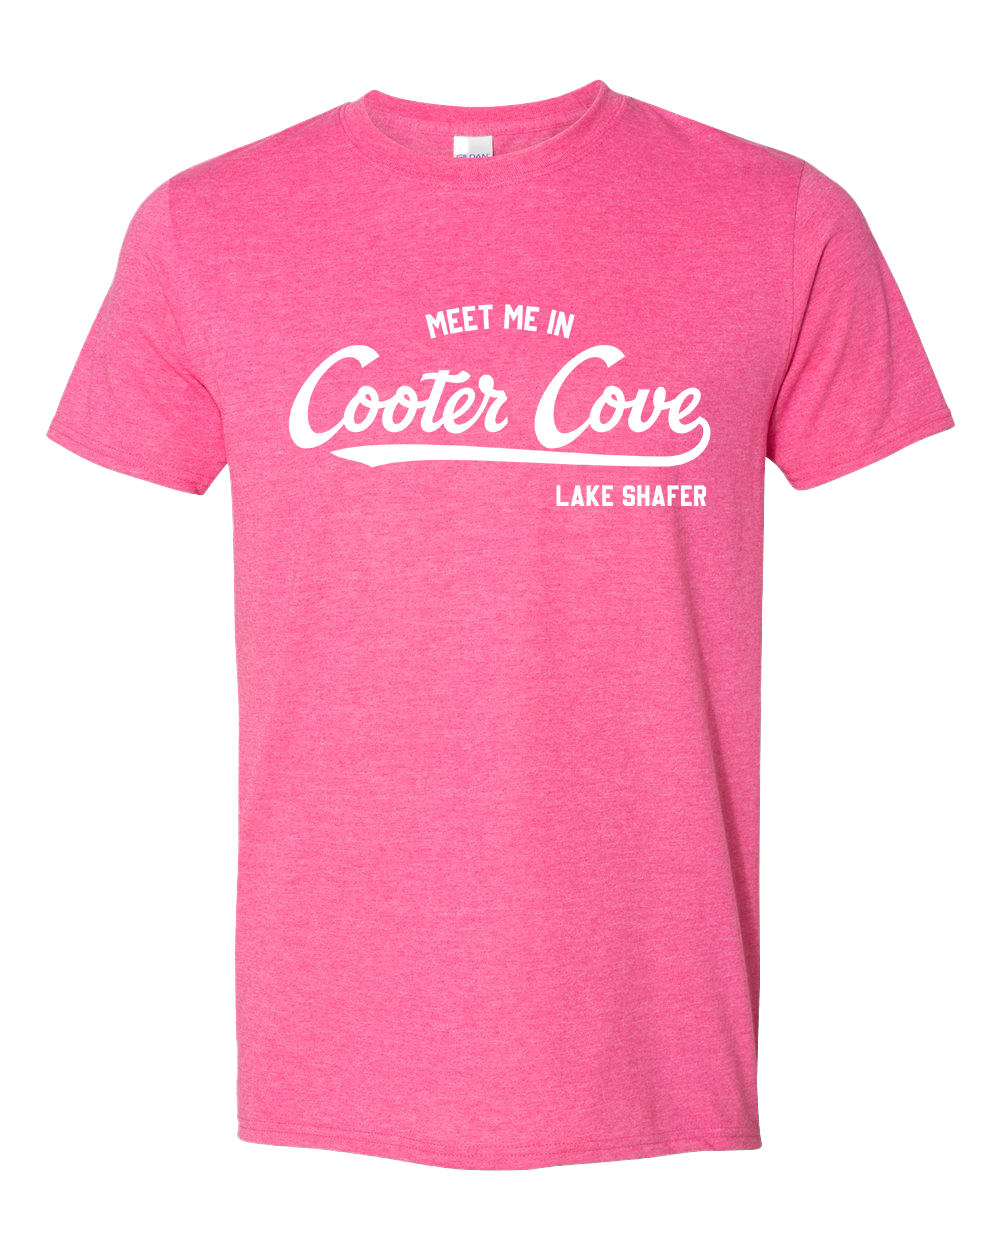 Cooter Cove Lake Shafer Tshirt - Various Colors